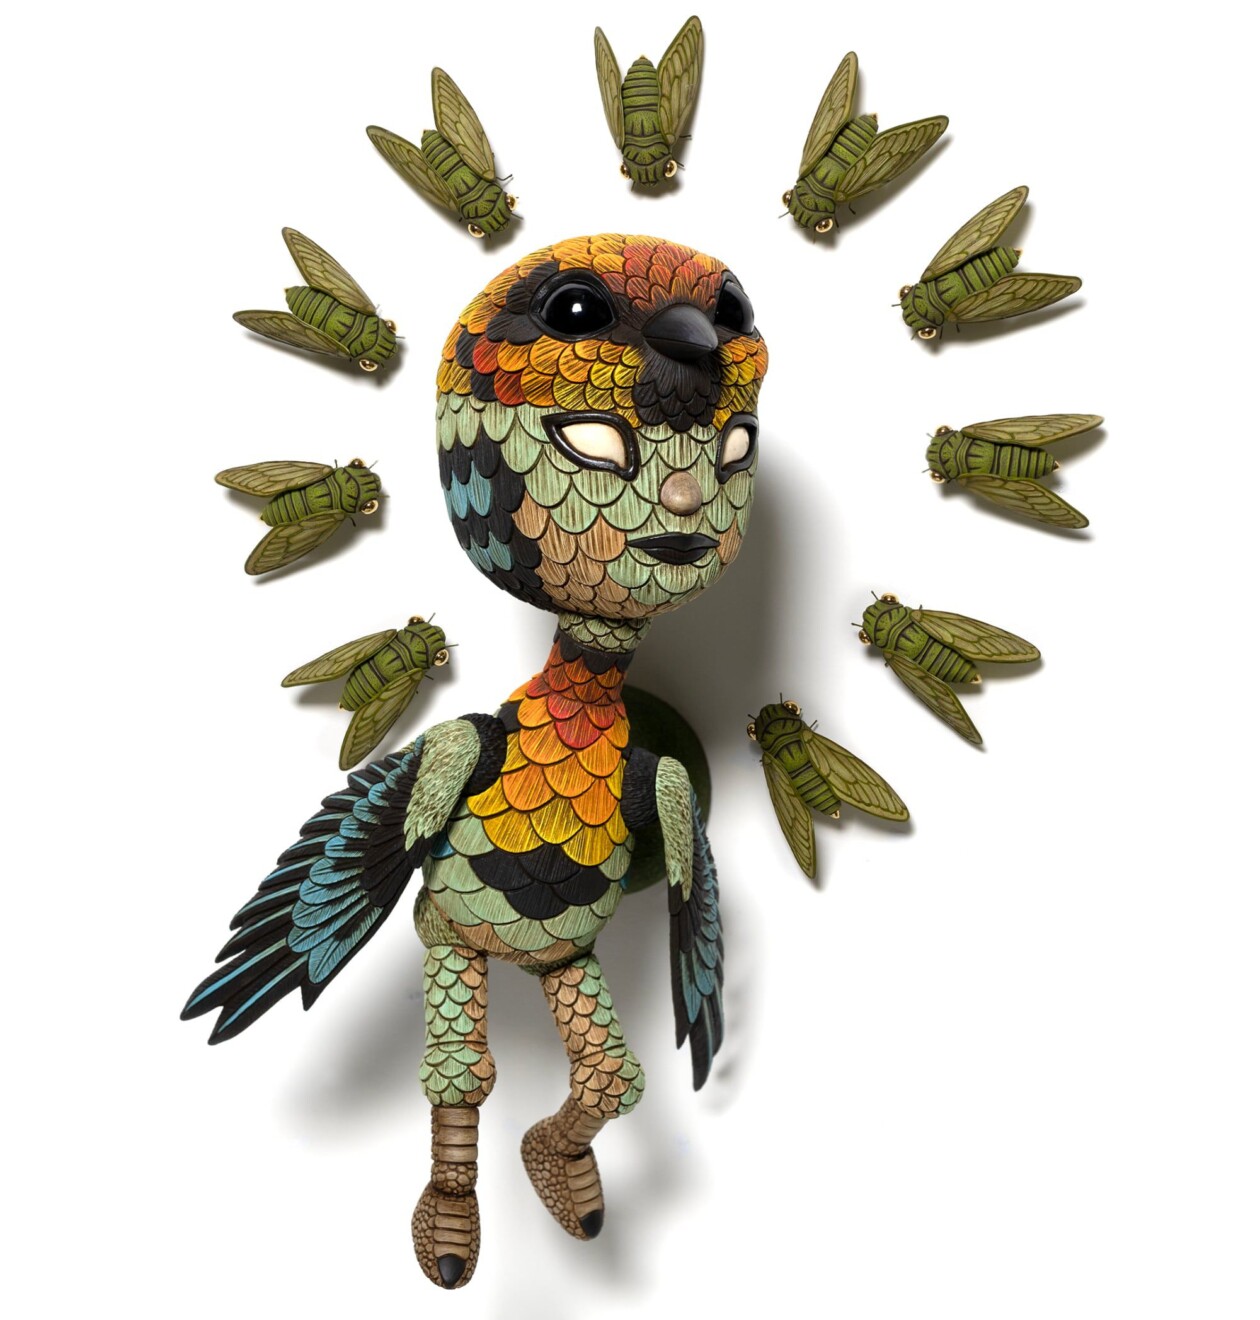 Marvelous Anthropomorphized Bird Sculptures By Calvin Ma (14)